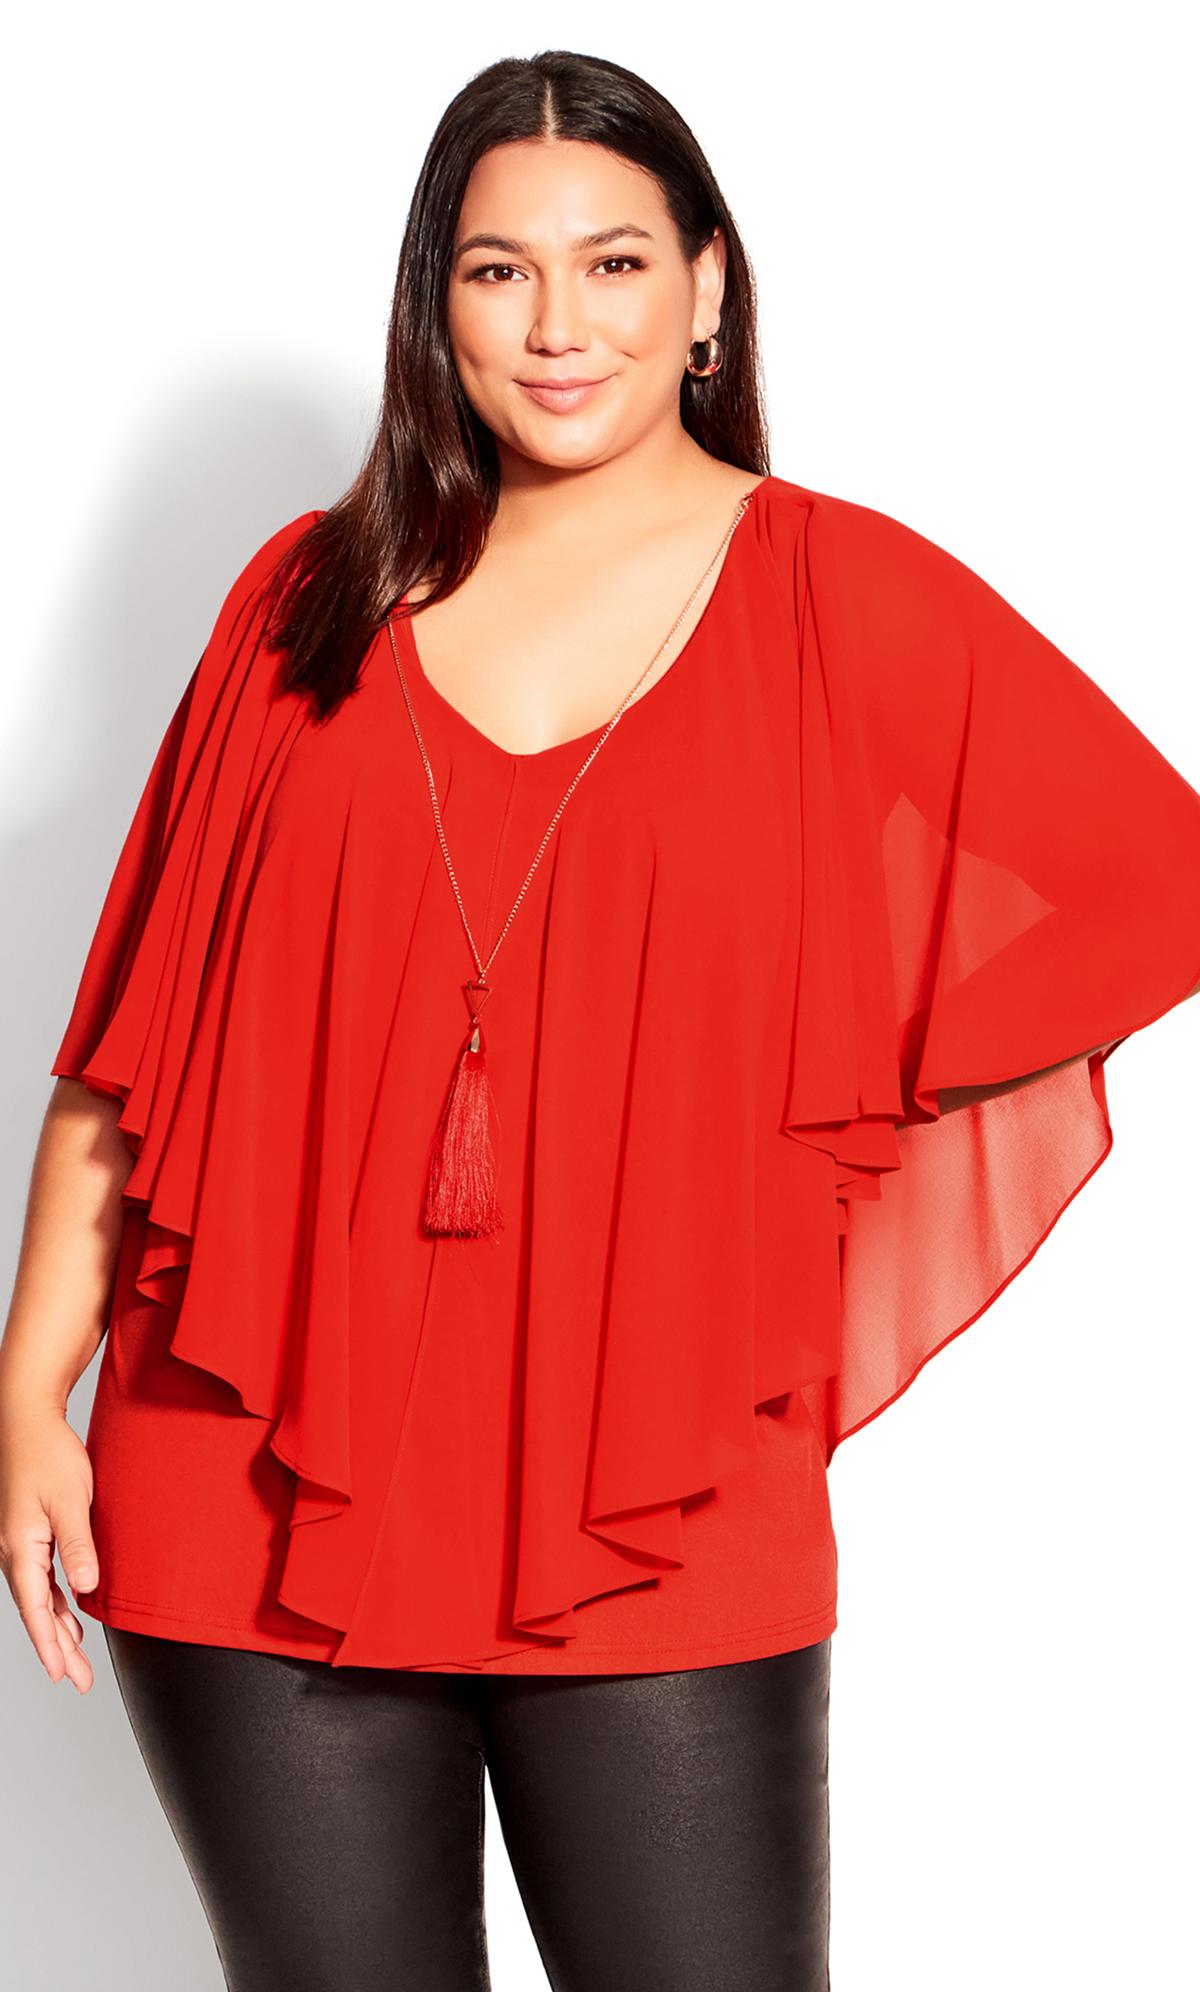 Mira Overlay Watermelon Red Necklace Top 2